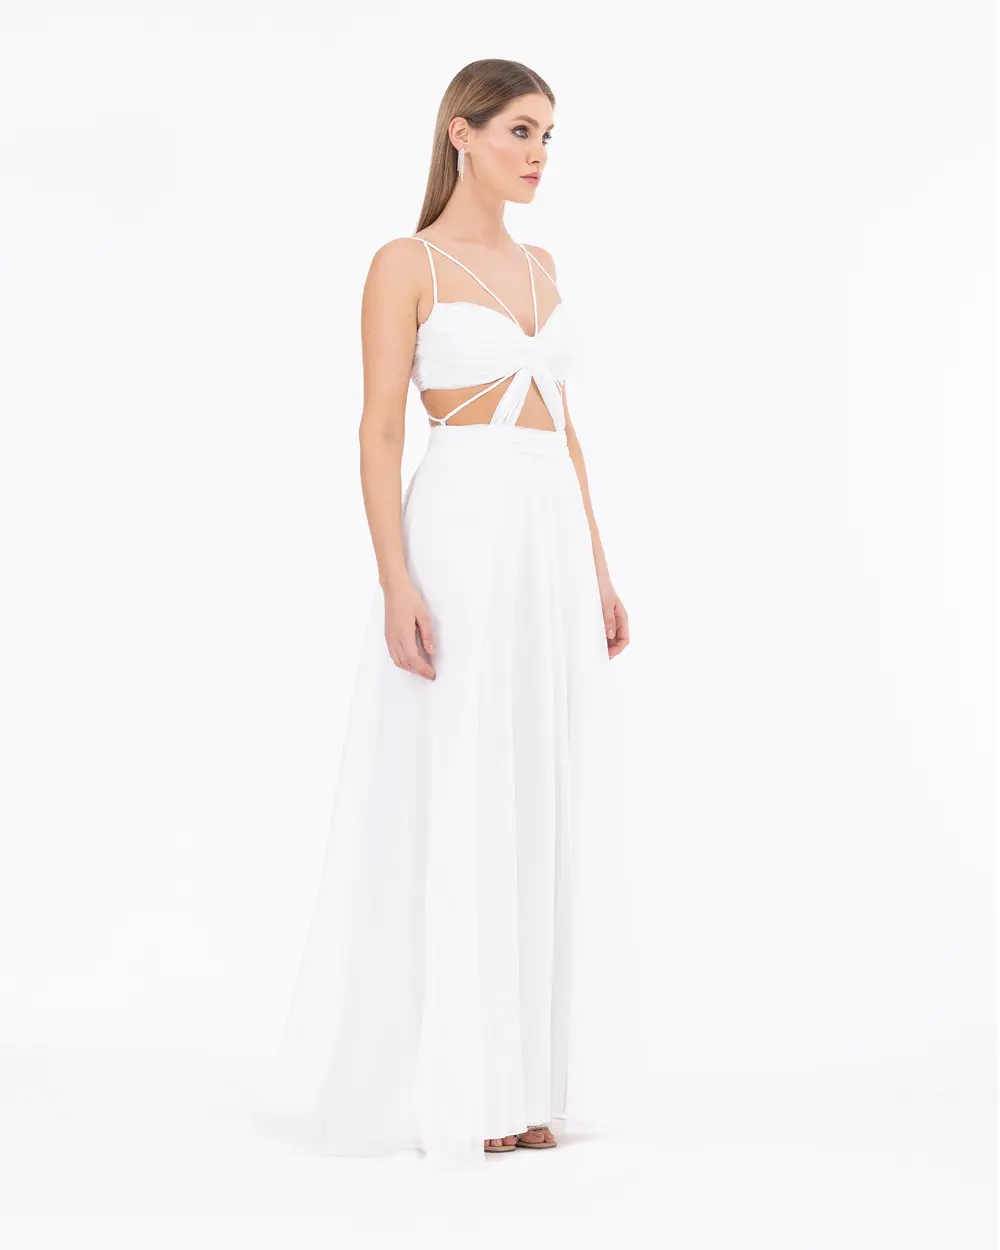 Window Detailed Chiffon Evening Dress with Straps